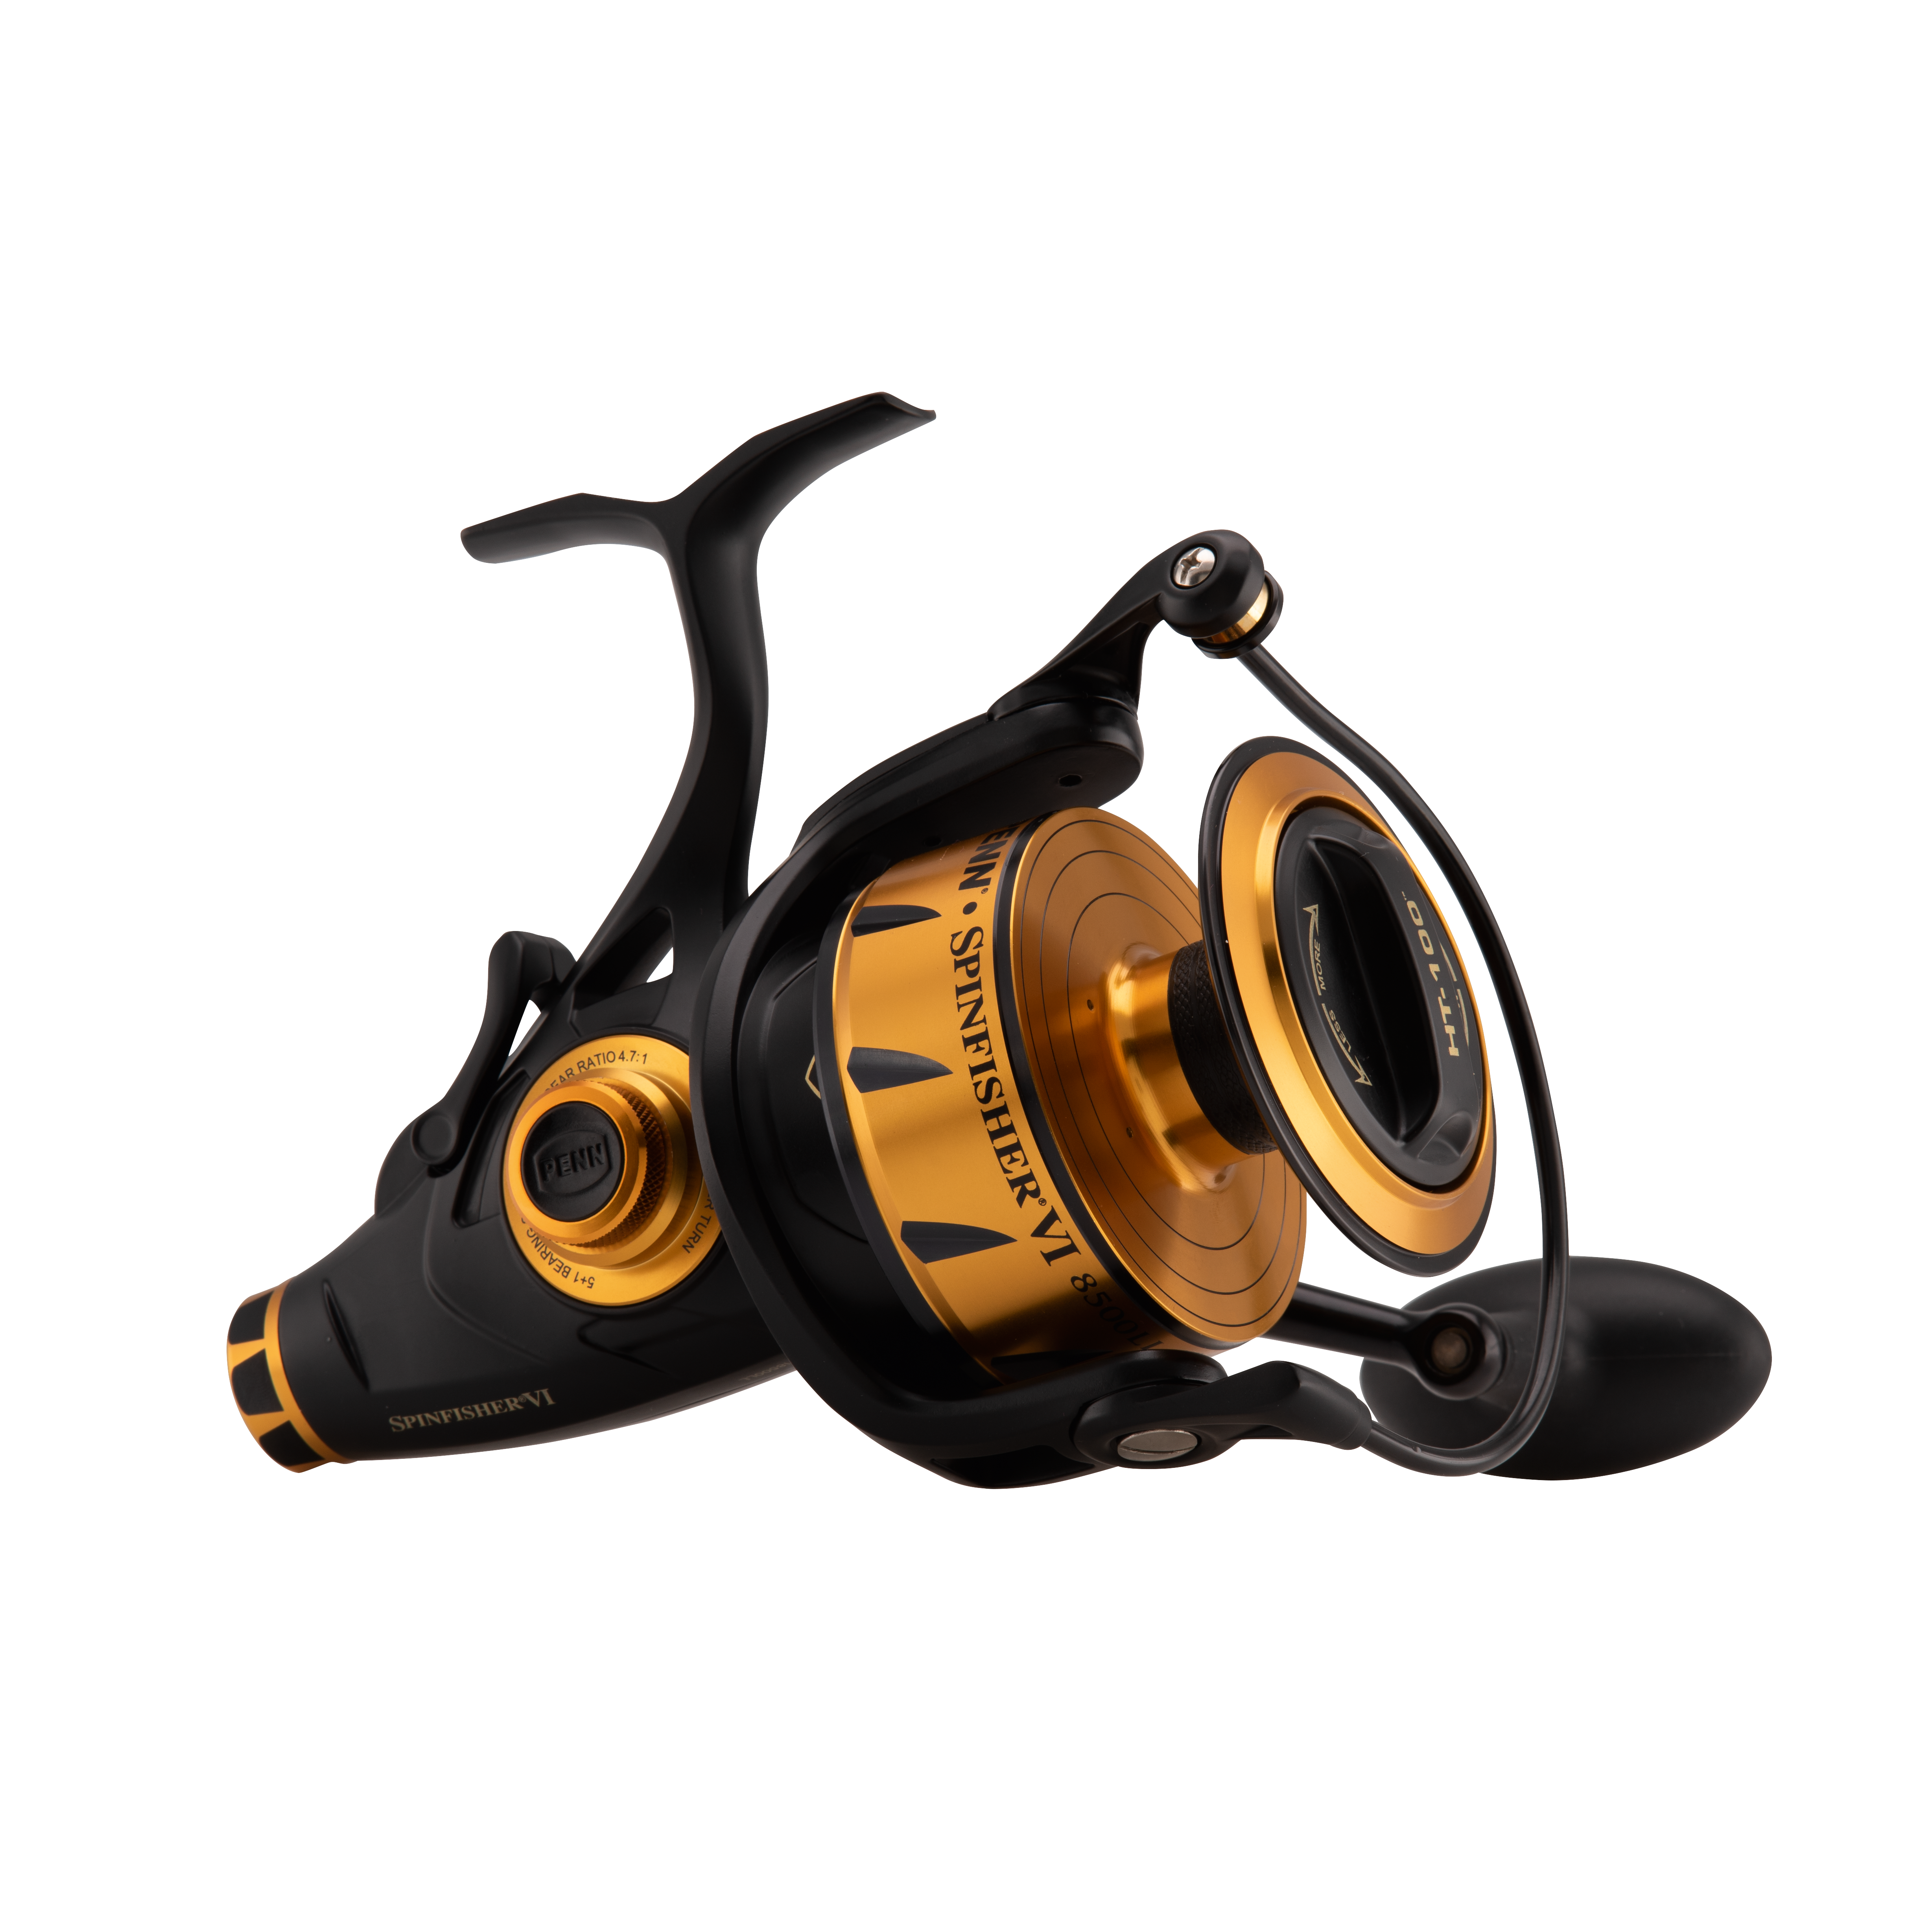 Details about   Penn Spinfisher VI 5500 Spinning Fishing Reel NEW @ Otto's Tackle World 